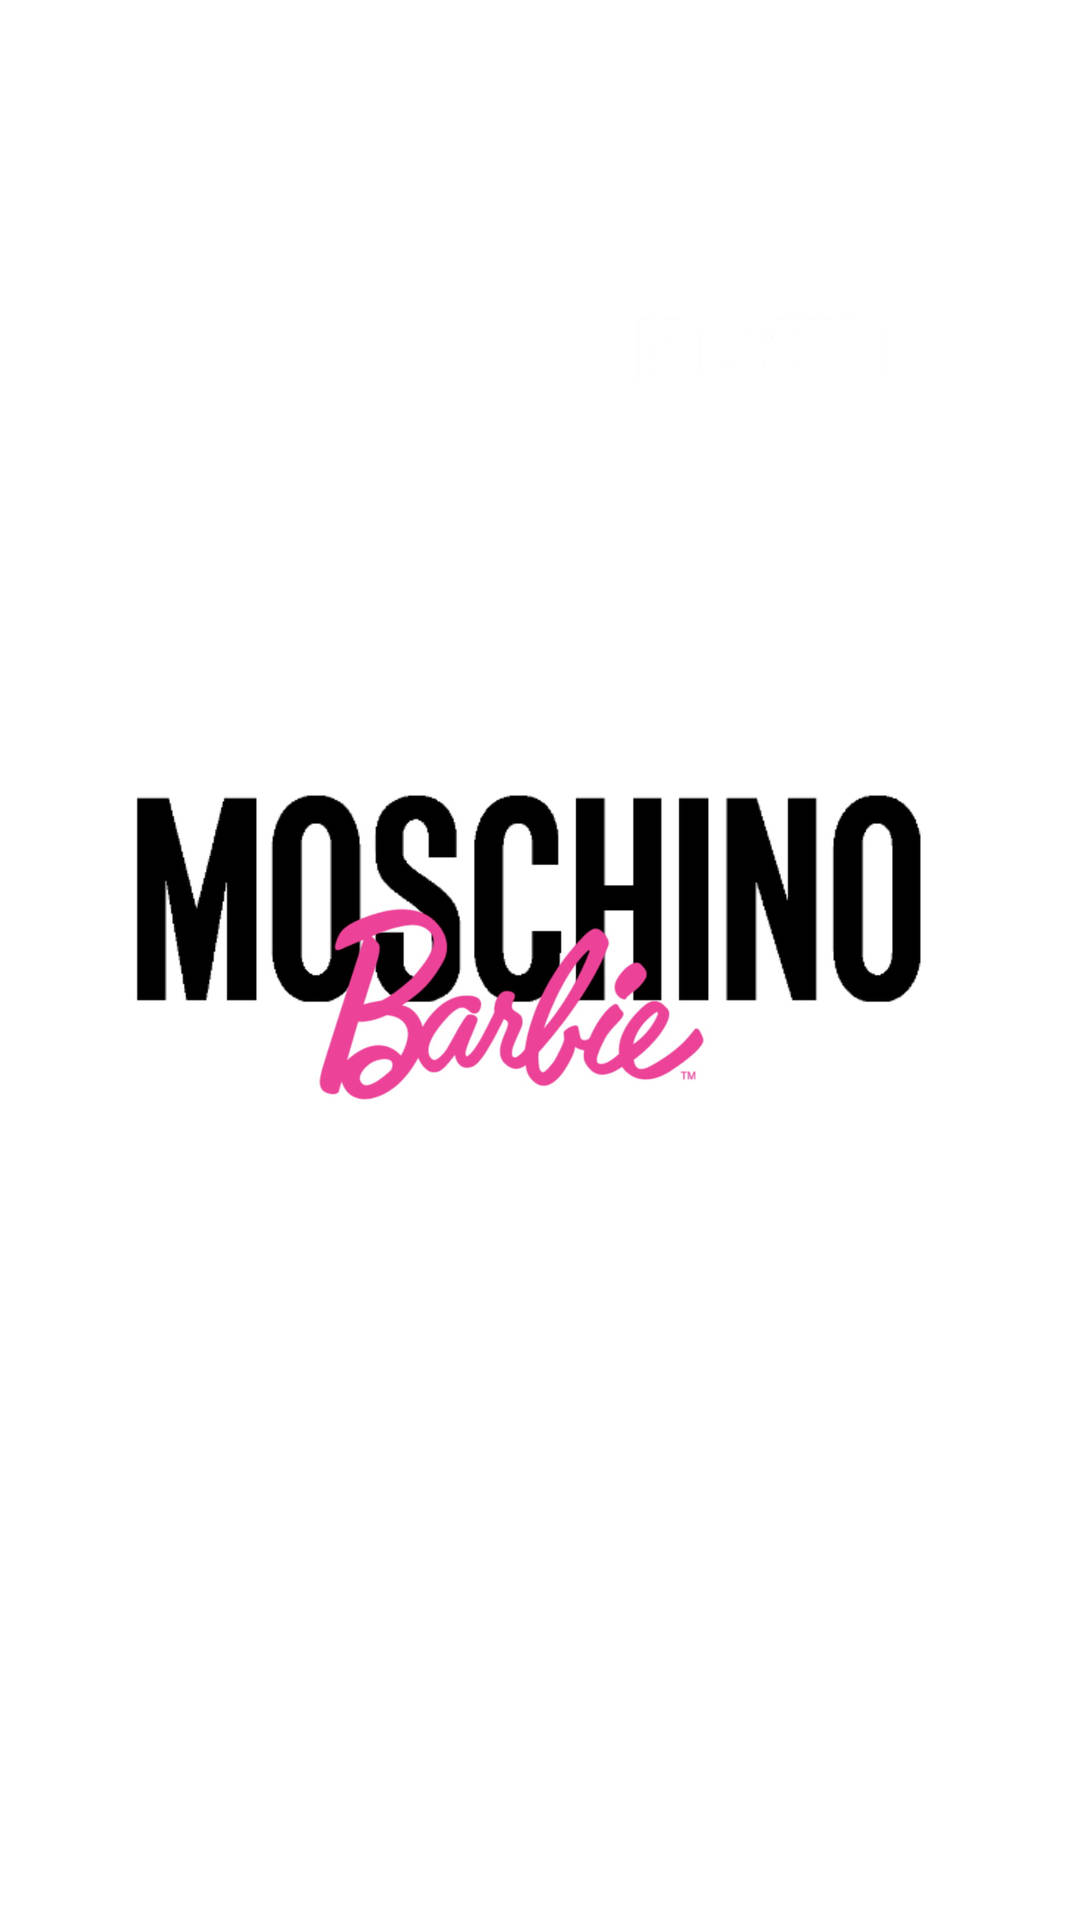 [100+] Moschino Wallpapers | Wallpapers.com